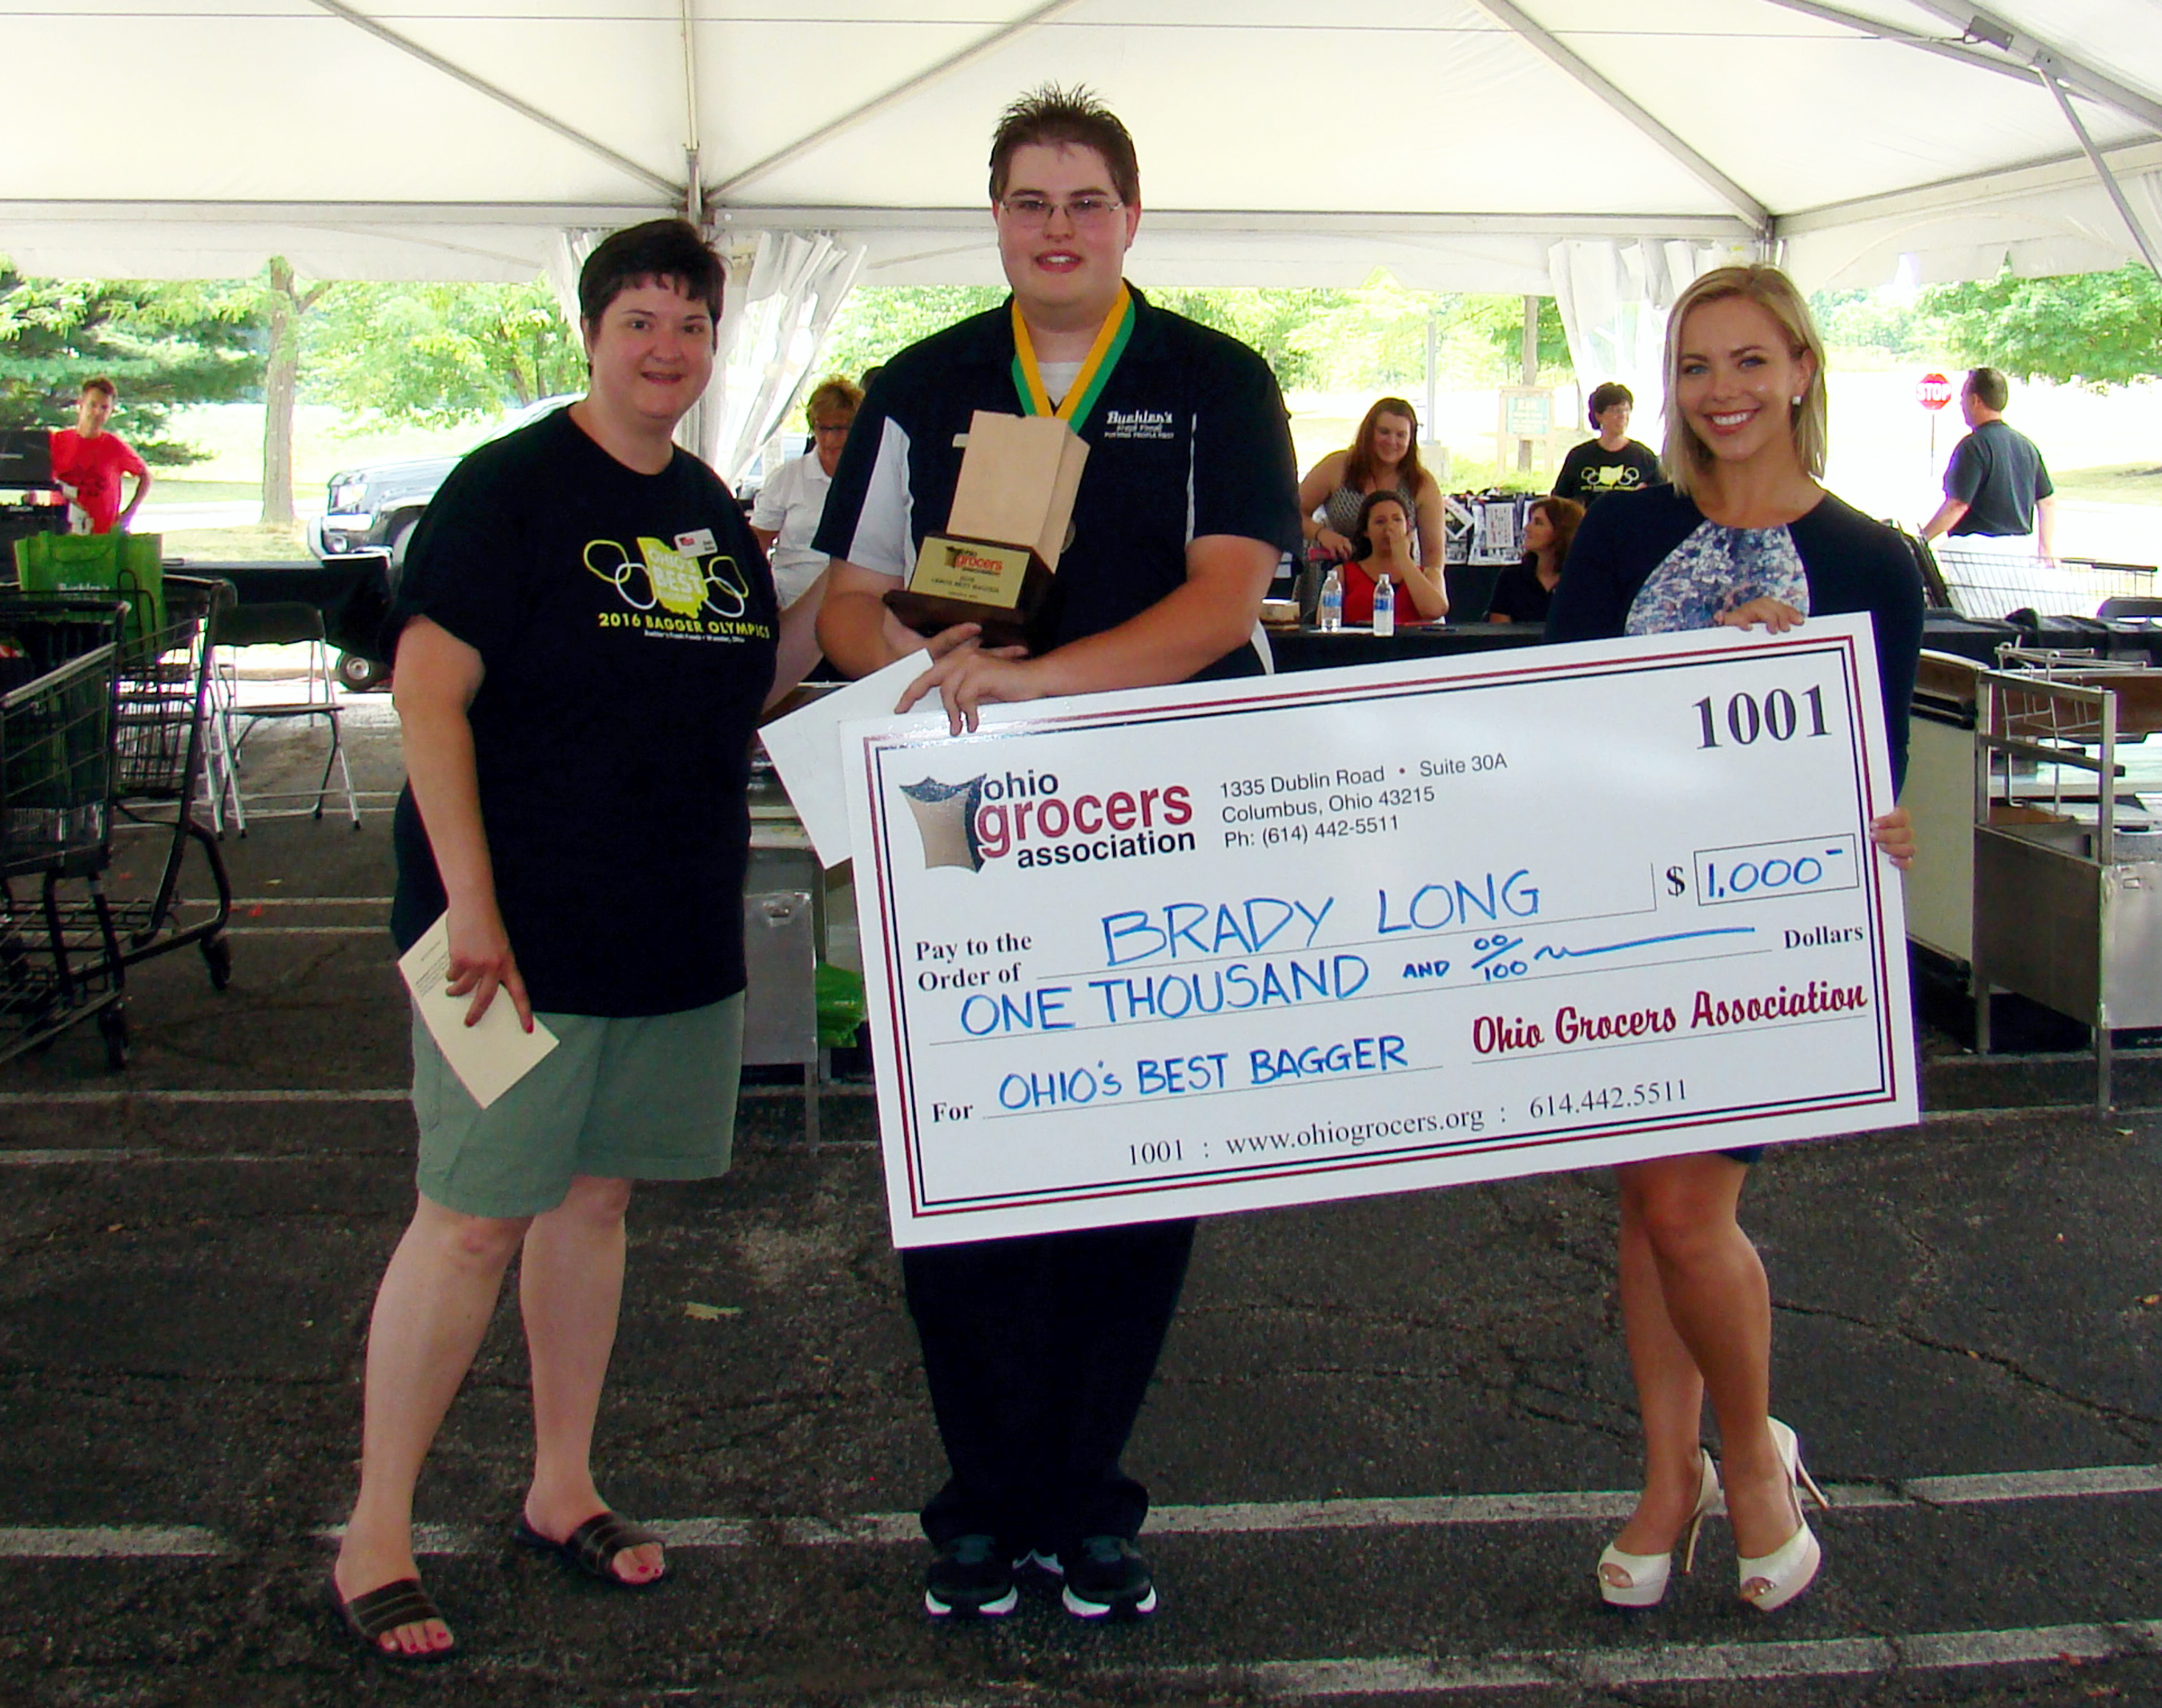 Ohio Grocery Association Bagger Competition winner 2016